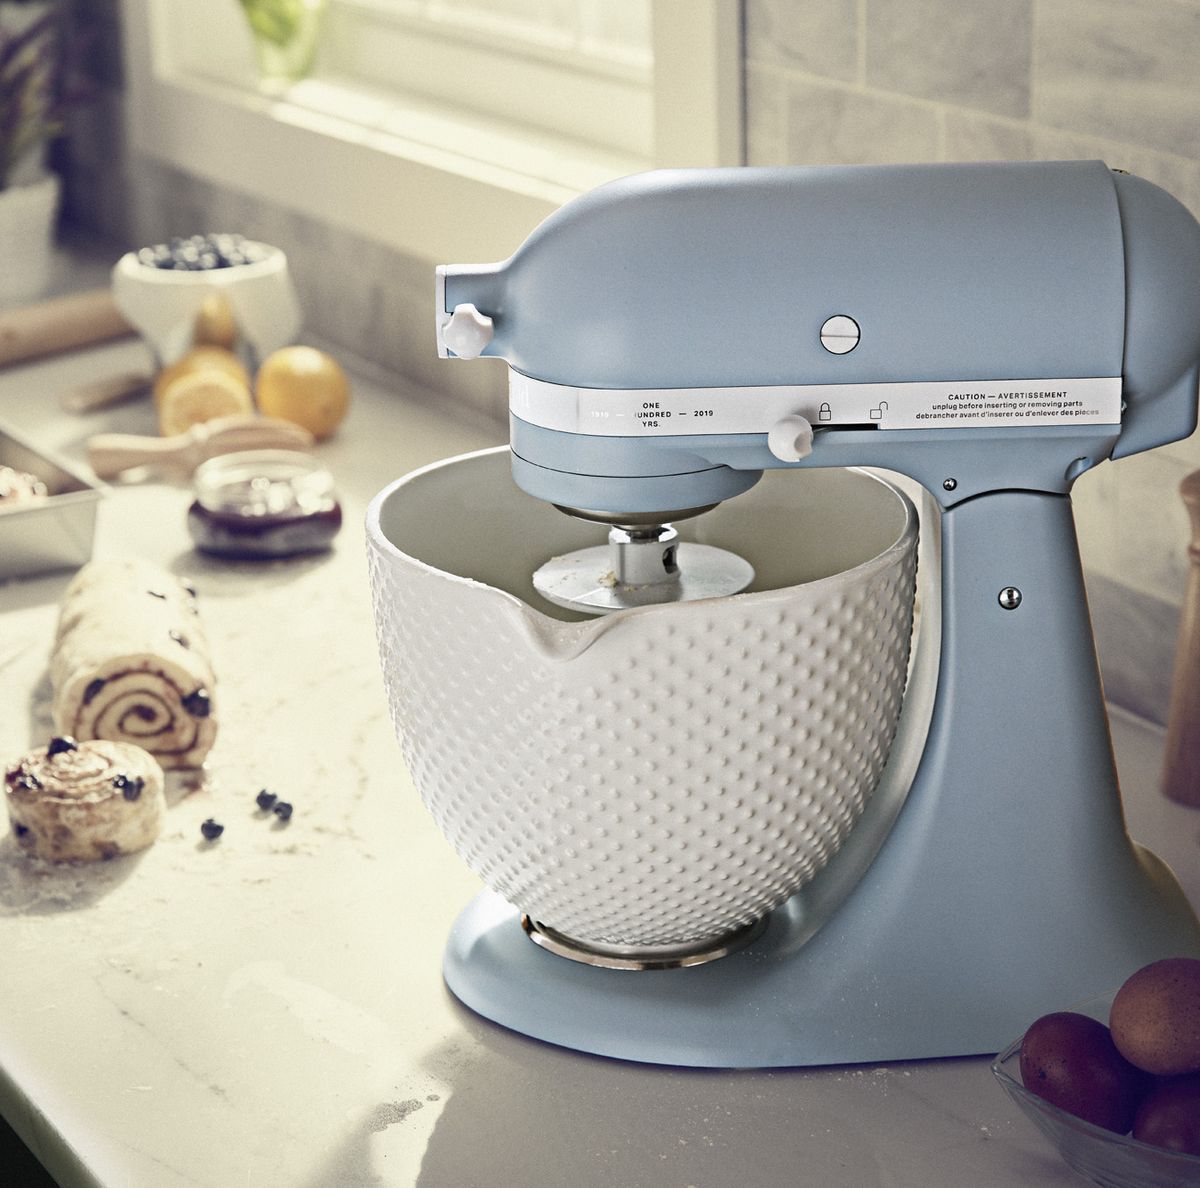 KitchenAid Has a New Limited Edition Stand Mixer Color